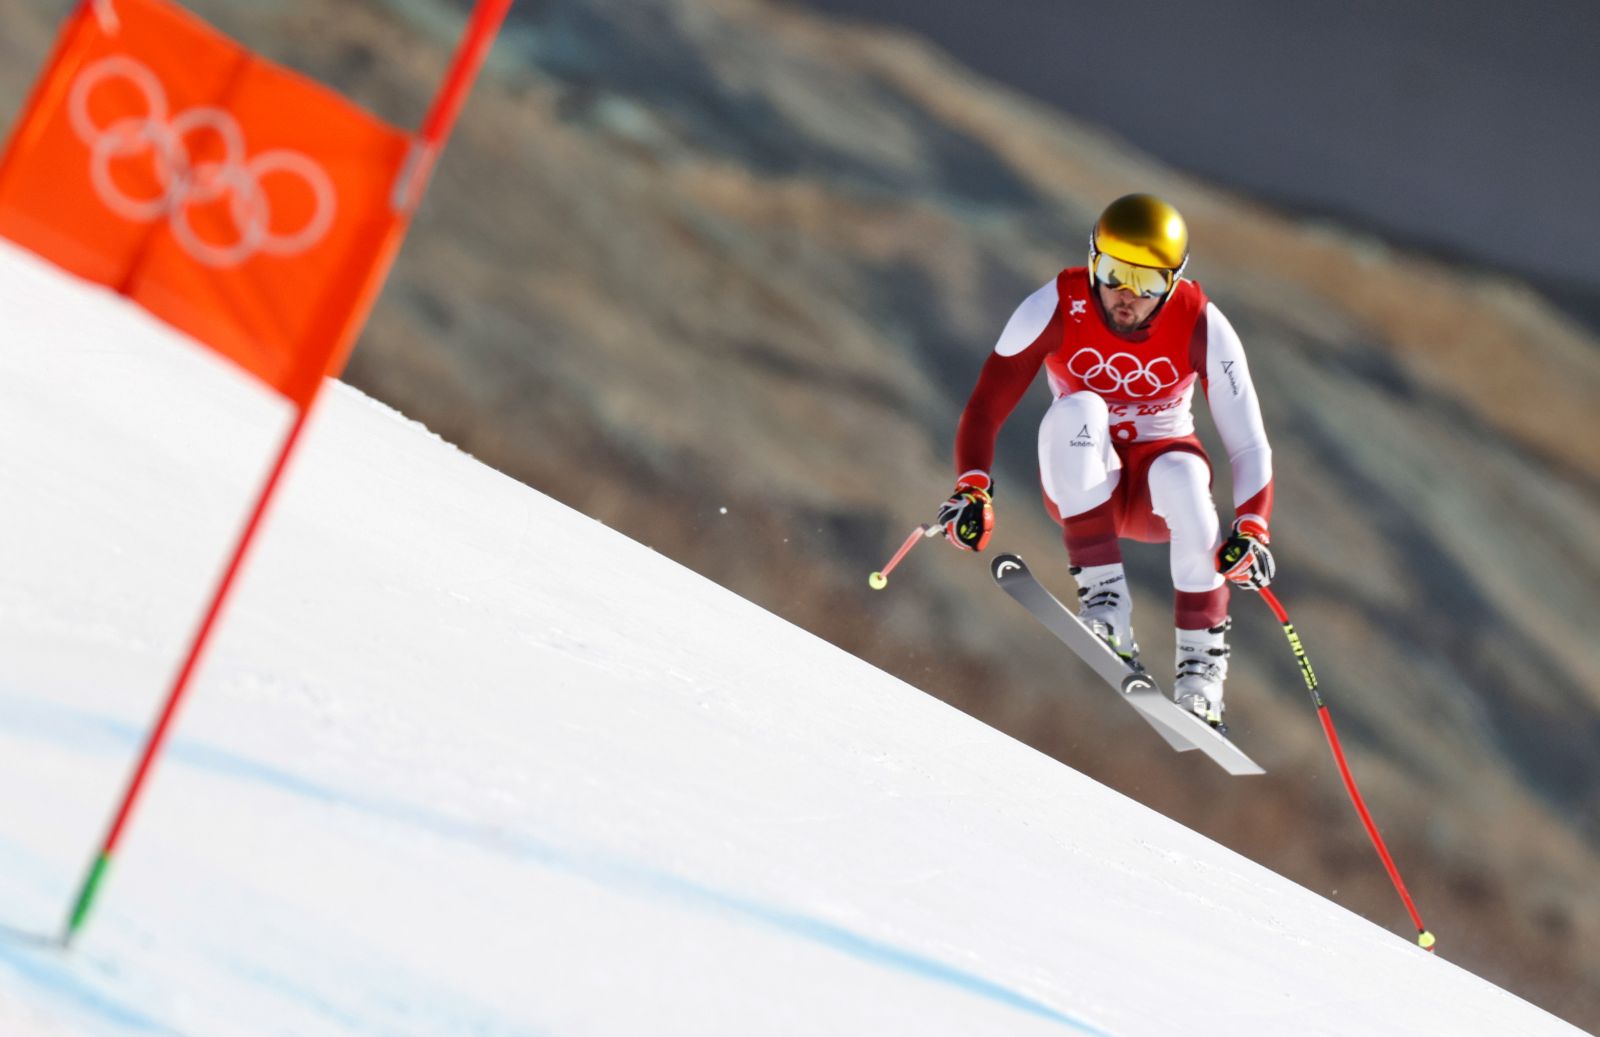 epa09742370 Johannes Strolz of Austria in action in the Men's Downhill race of the Alpine Combined competion of the Beijing 2022 Olympic Games at the Yanqing National Alpine Ski Centre Skiing, Beijing municipality, China, 10 February 2022.  EPA/GUILLAUME HORCAJUELO